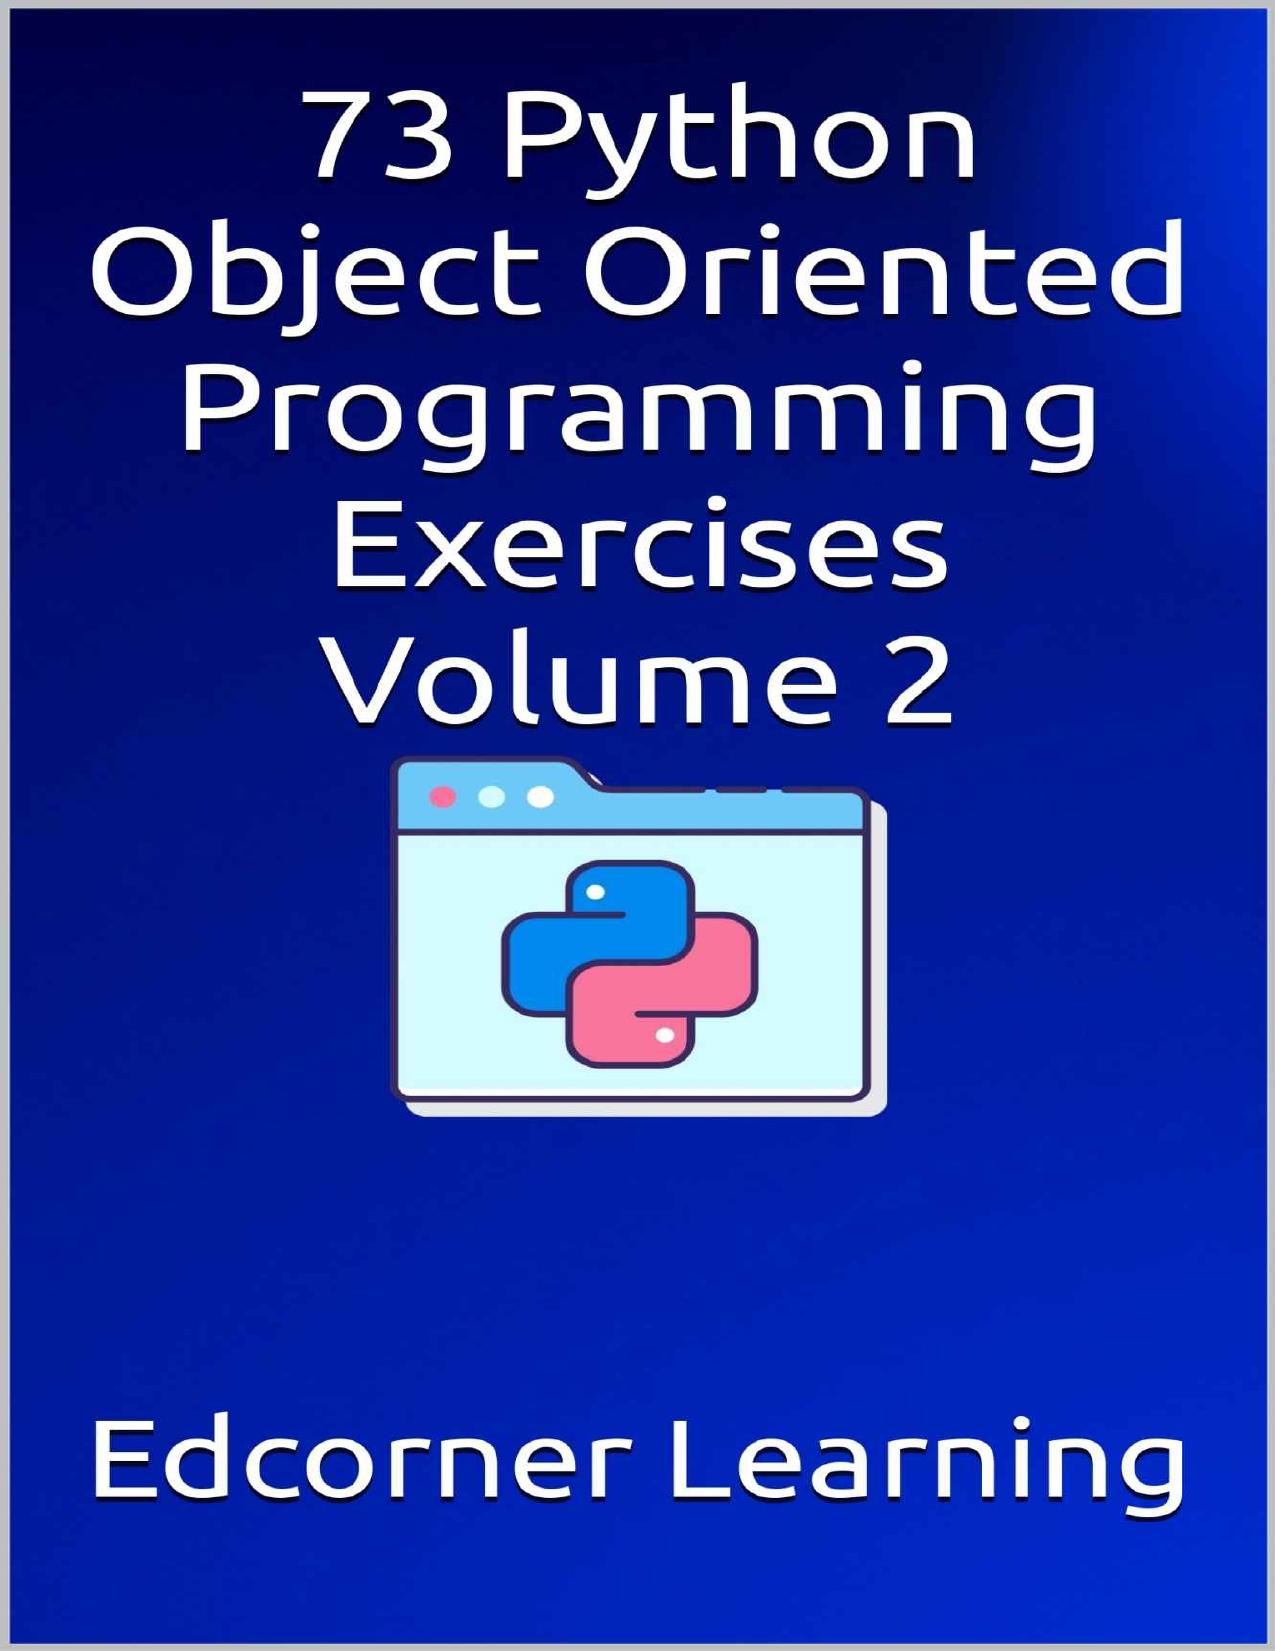 73 Python Object Oriented Programming Exercises Volume 2